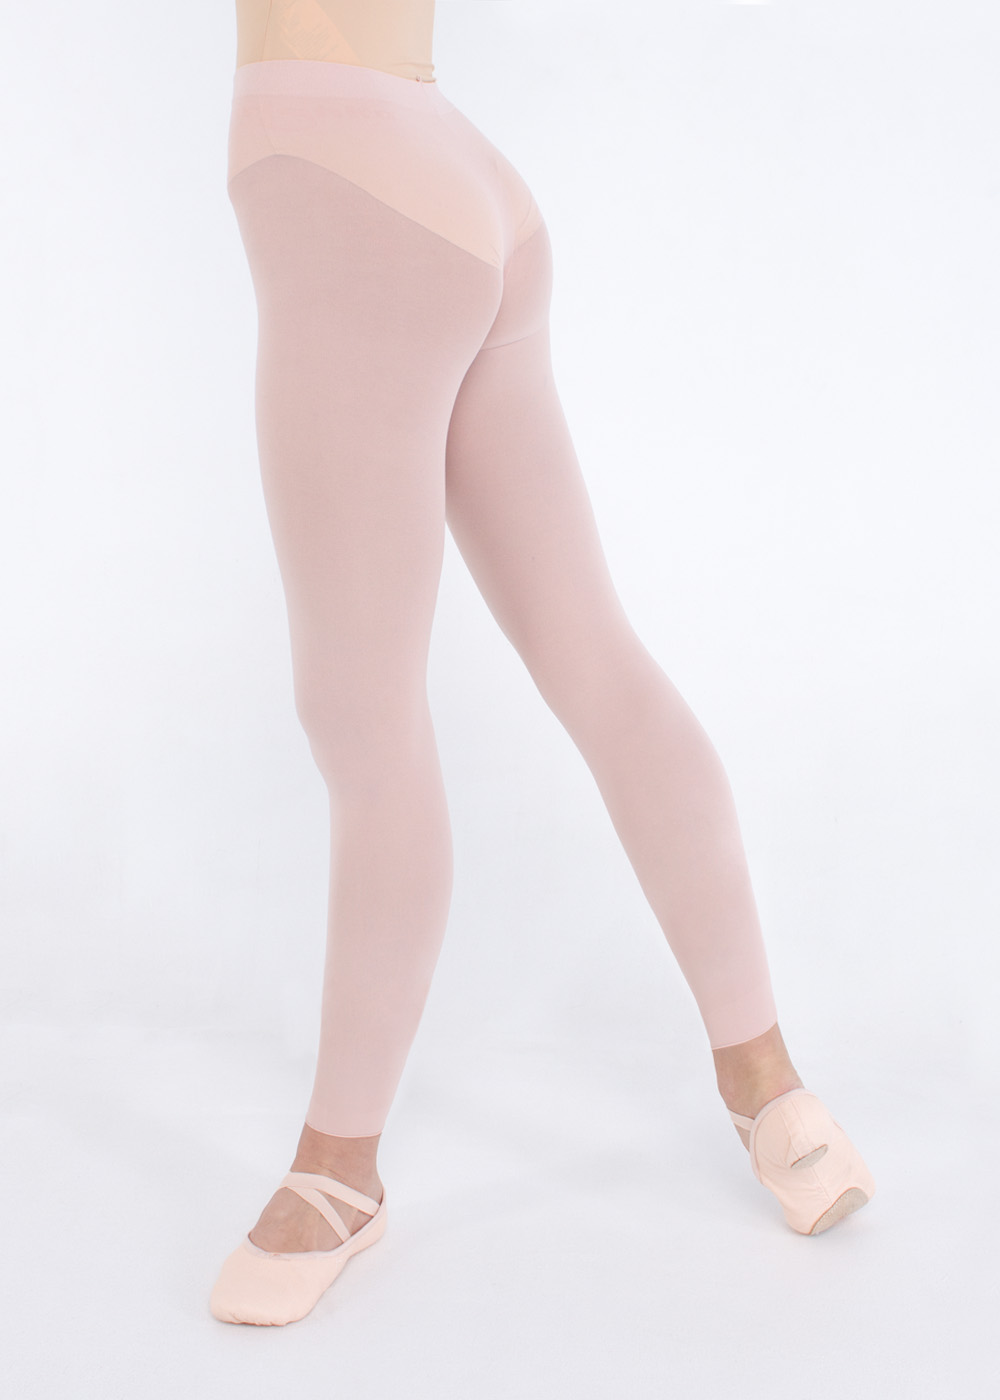 L1 Footed microfiber tights (L1)  Grishko® Buy online the best ballet  products. Order now!